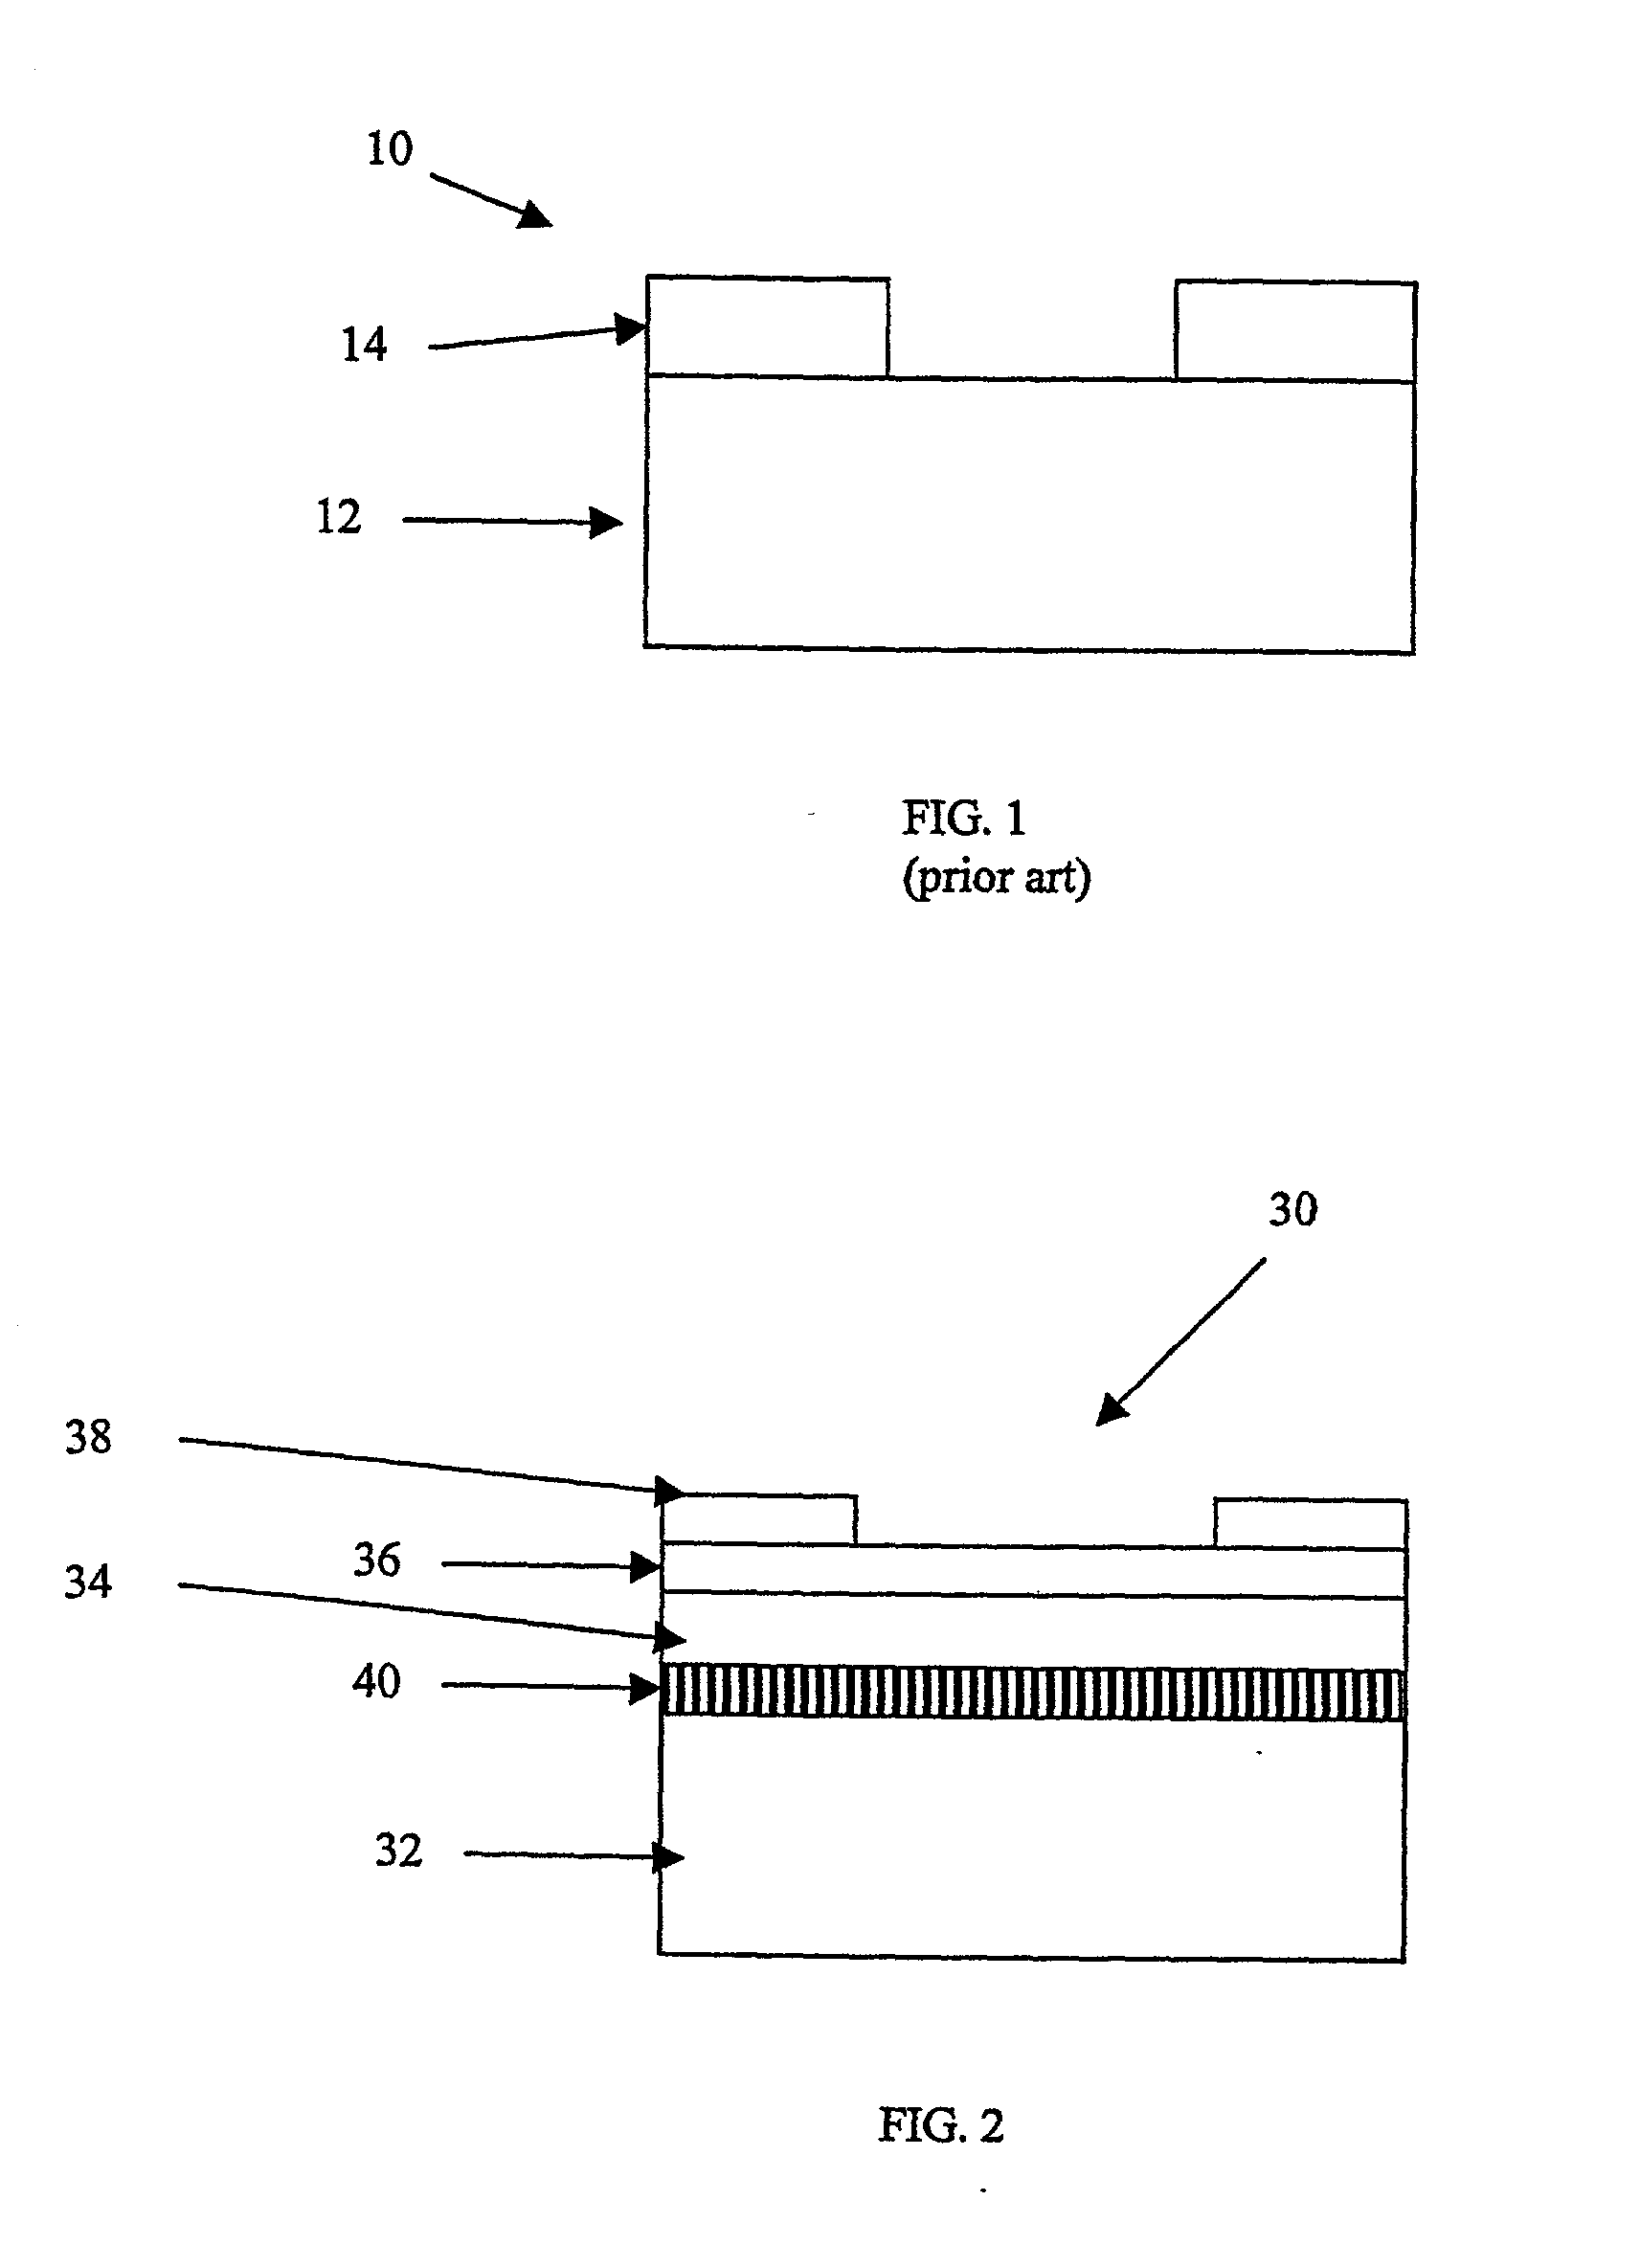 Embedded attenuated phase shift mask and method of making embedded attenuated phase shift mask